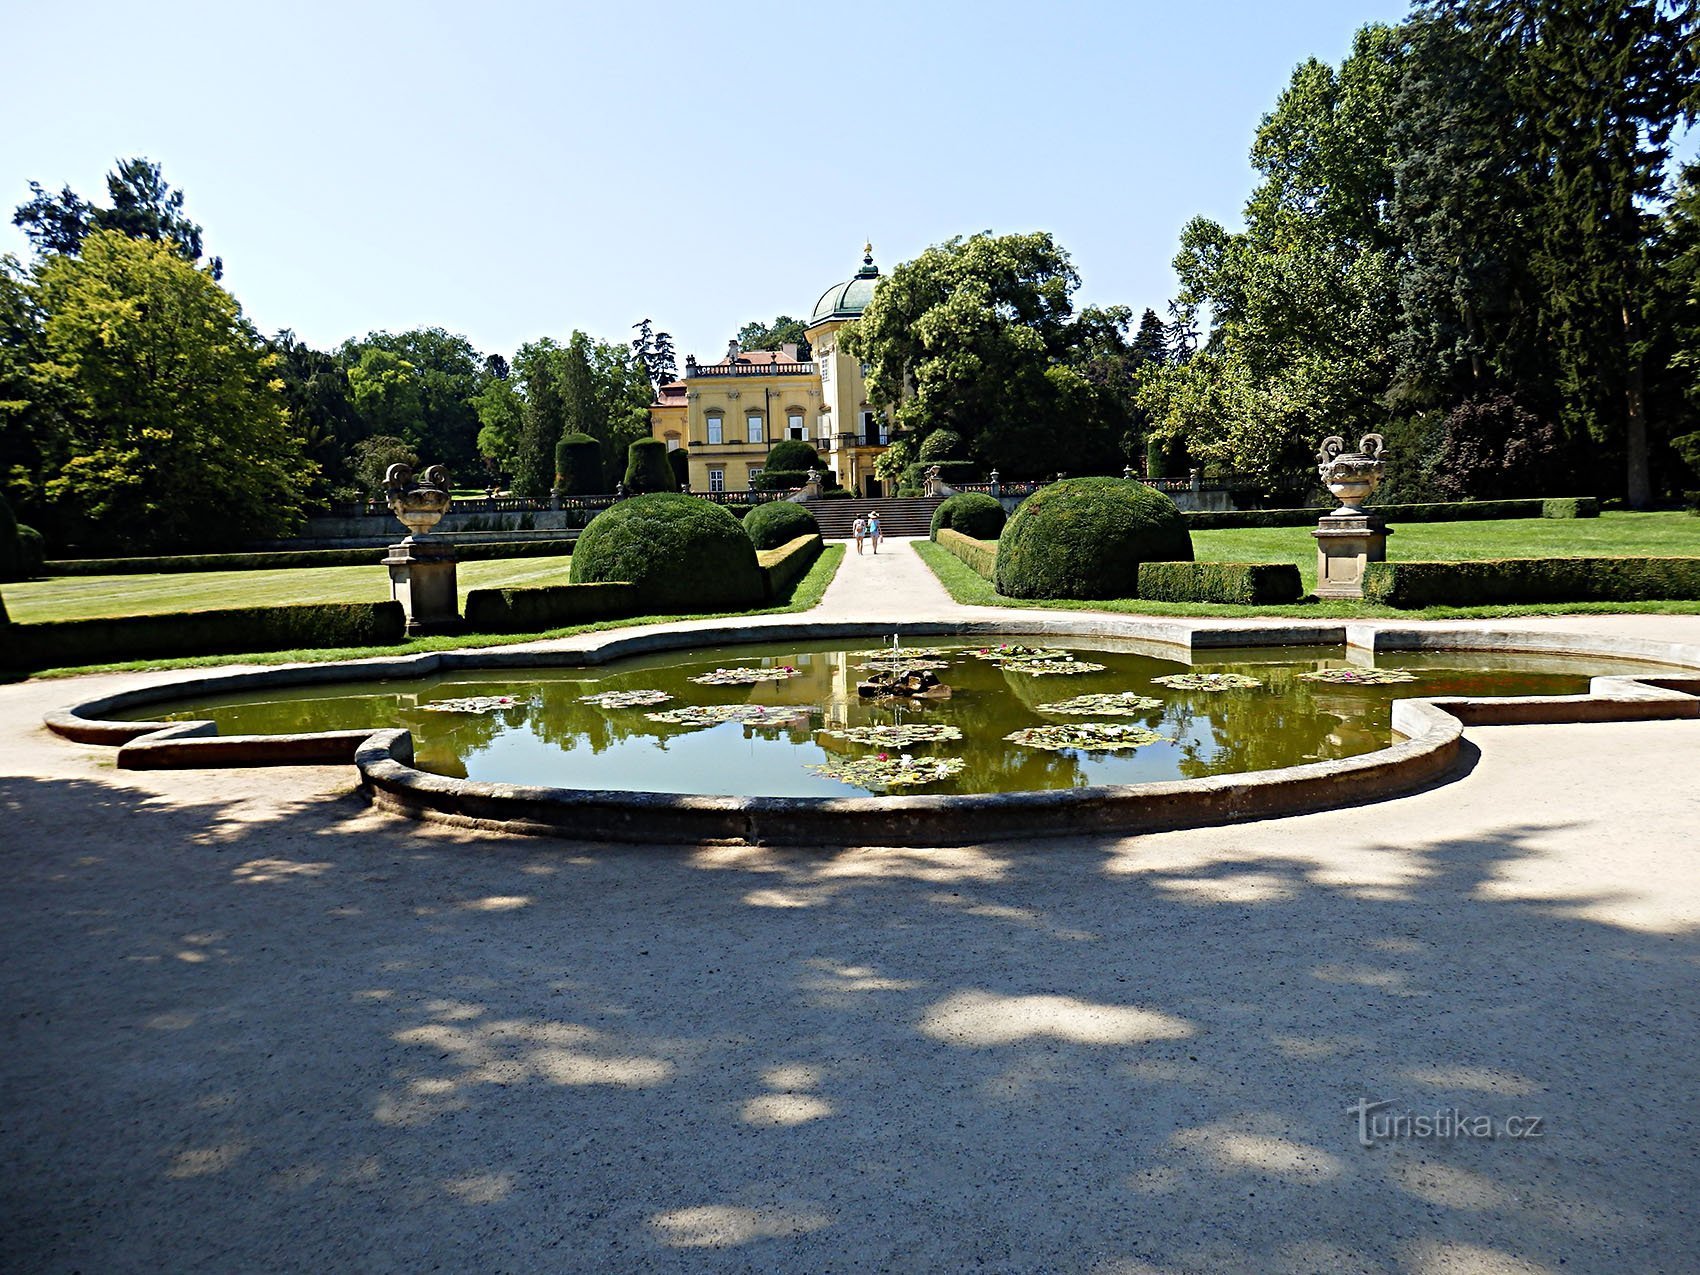 the area of ​​the castle park and garden in Buchlovice is one of the most important and most beautiful